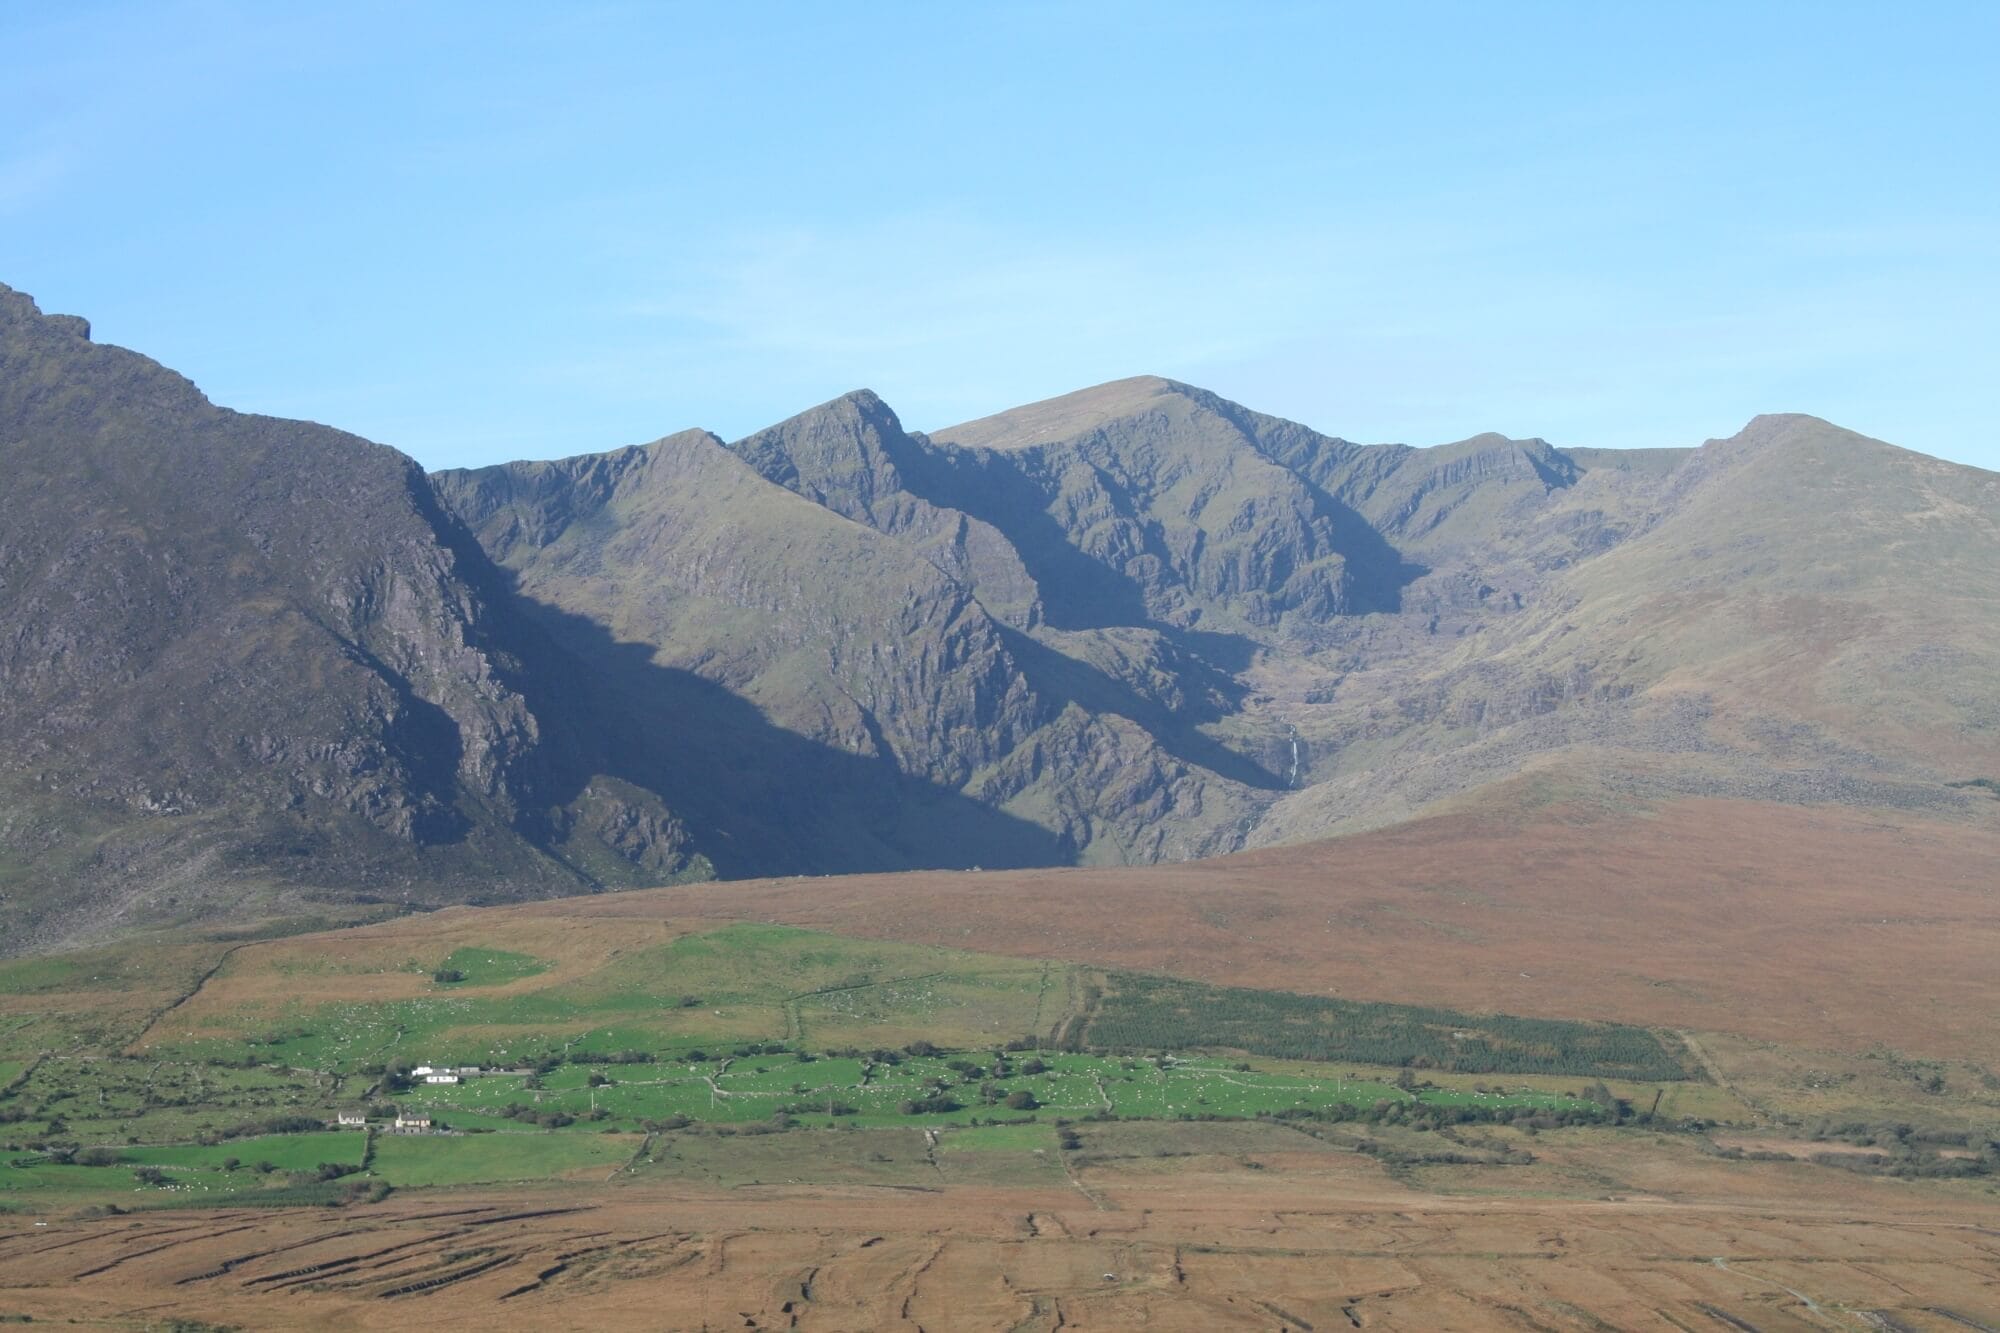 Mount Brandon - one of the tallest mountains in Ireland